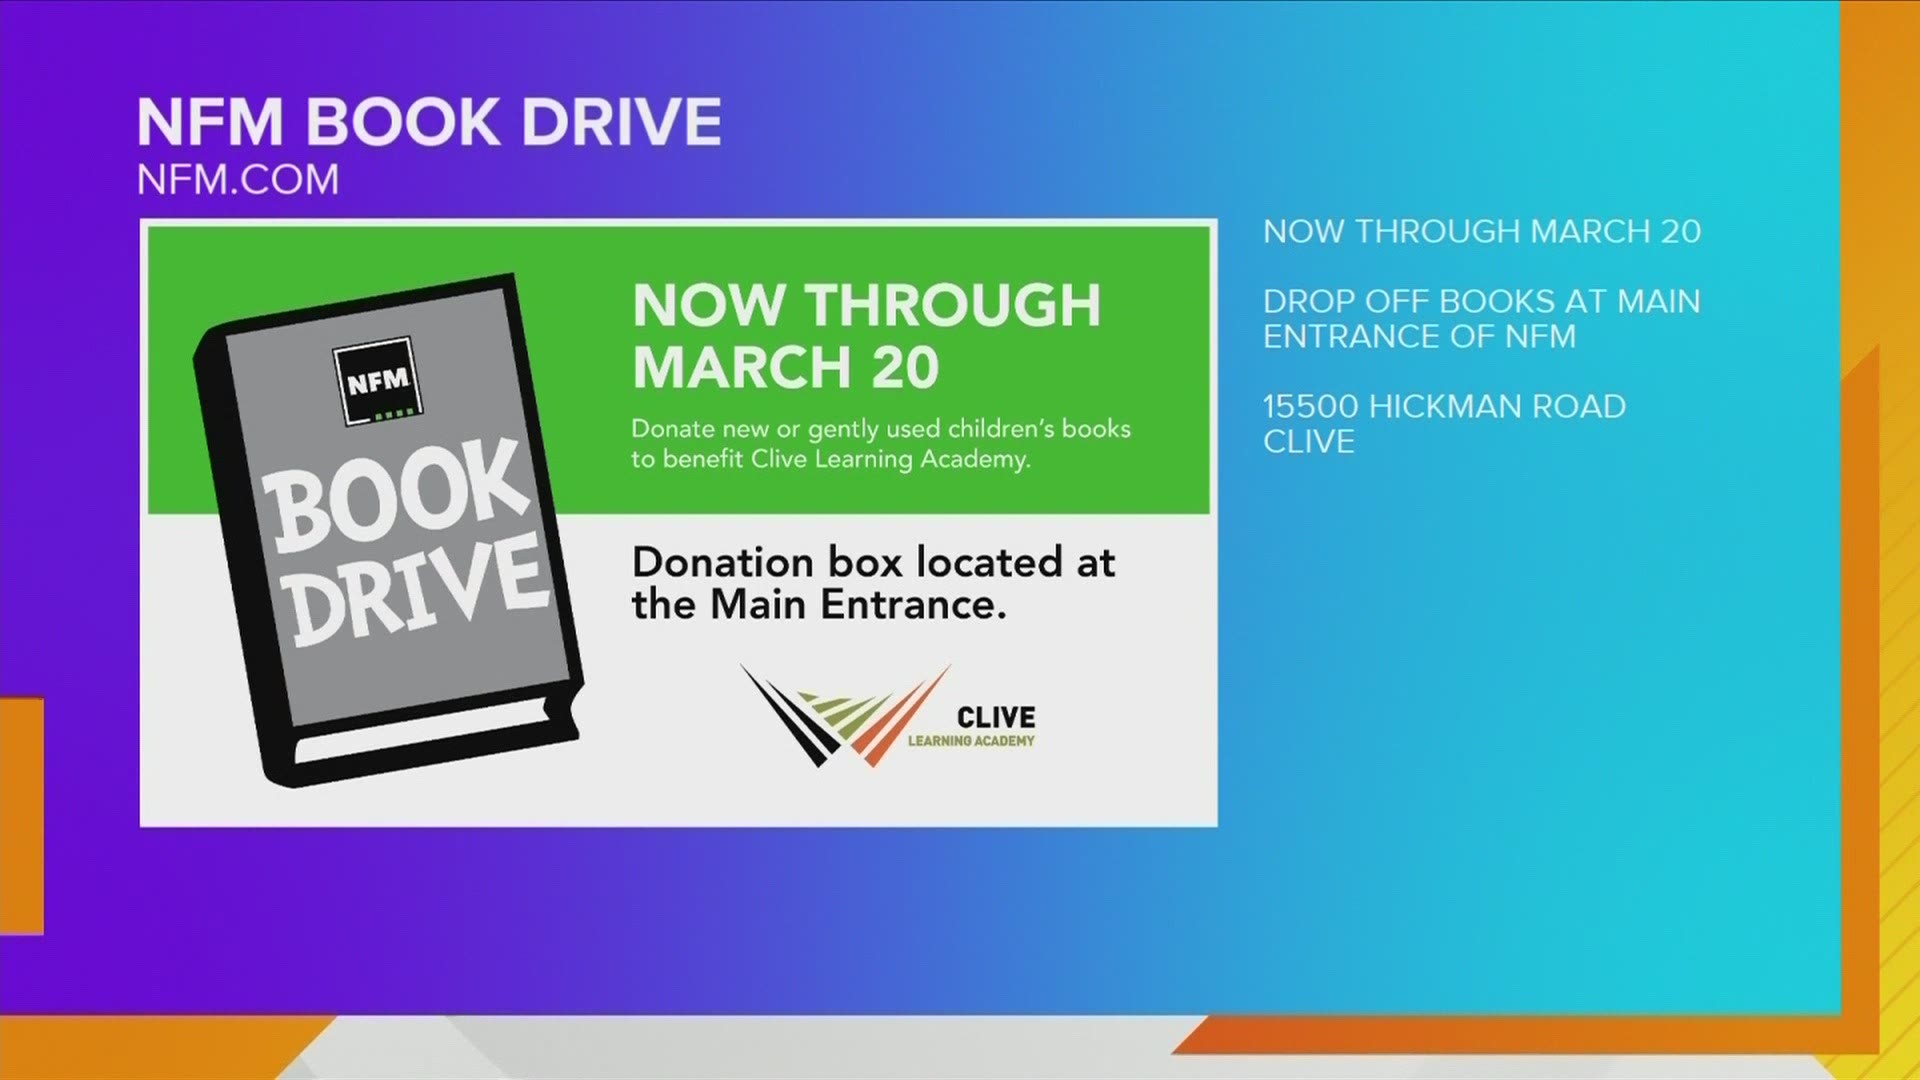 Nebraska Furniture Mart is looking for your new or gently used books for their book drive to benefit the Clive Learning Academy | PAID CONTENT